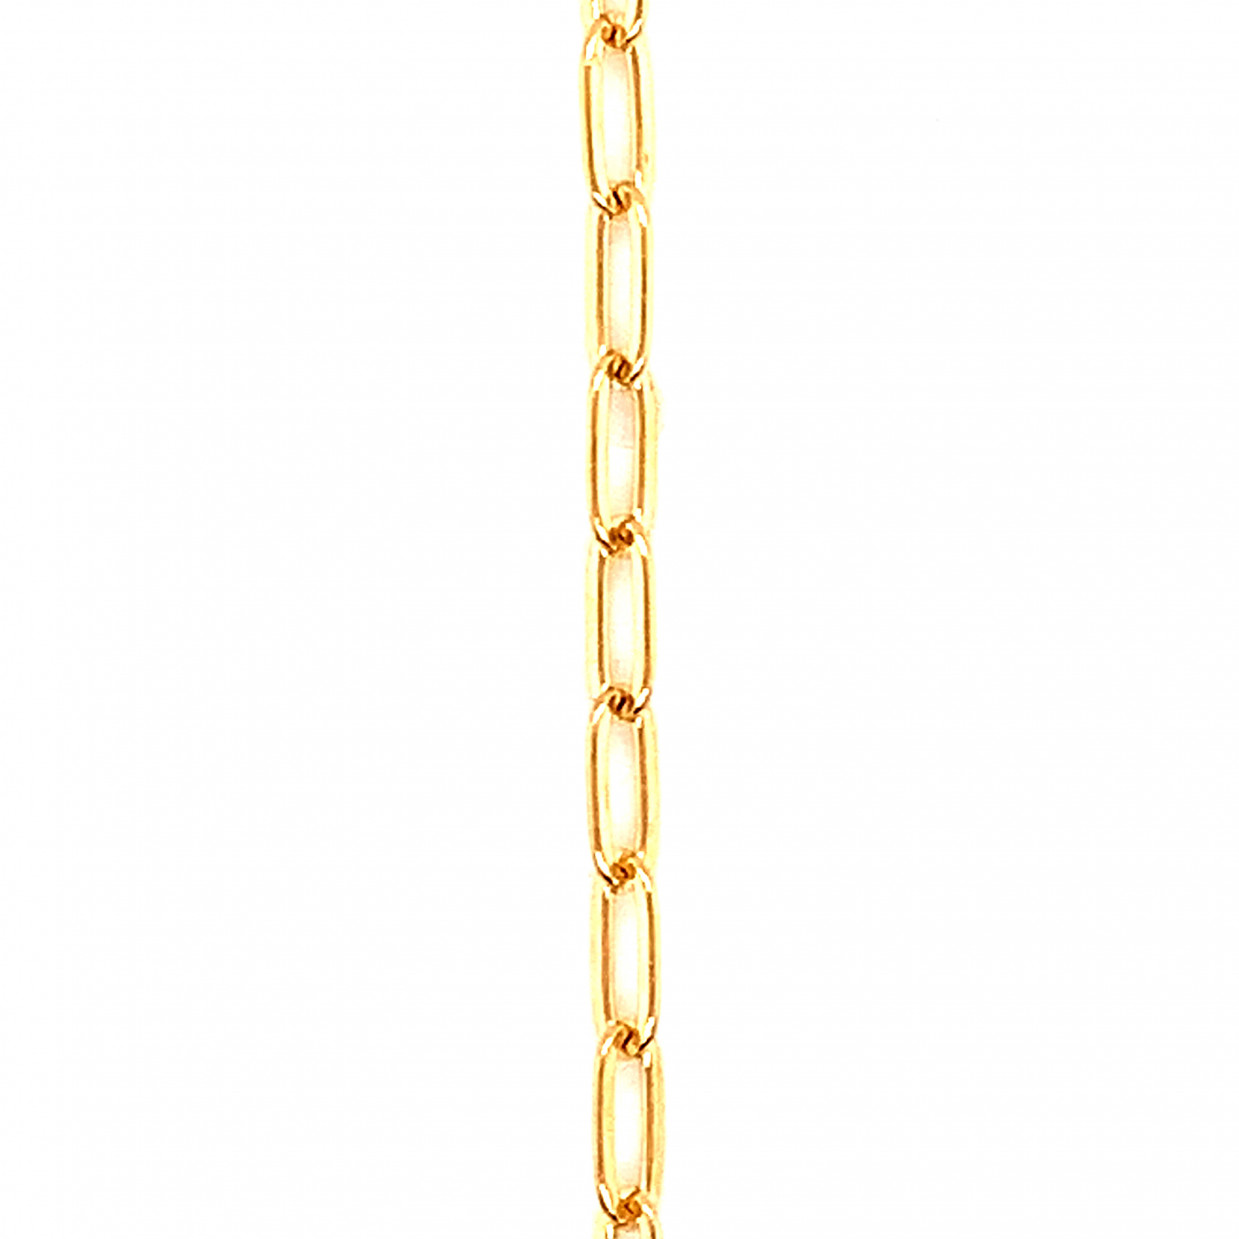 16" 2mm Flat Rectangle Chain - Gold Filled